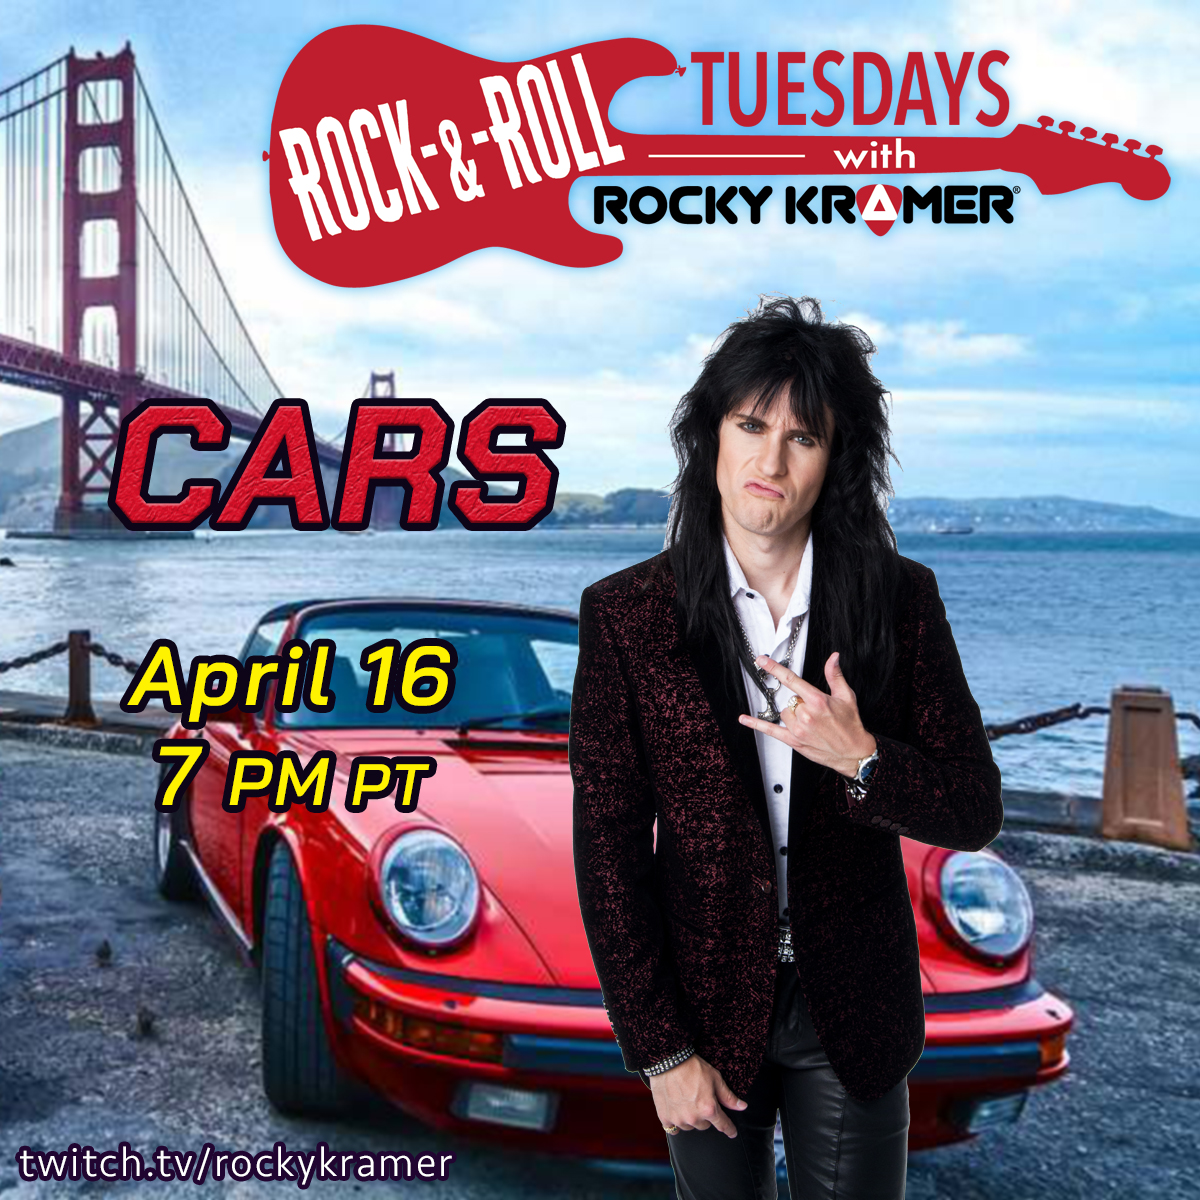 Rocky Kramer’s Rock & Roll Tuesdays Presents  “CARS” On Tuesday April 16th, 2024, 7 PM PT on Twitch